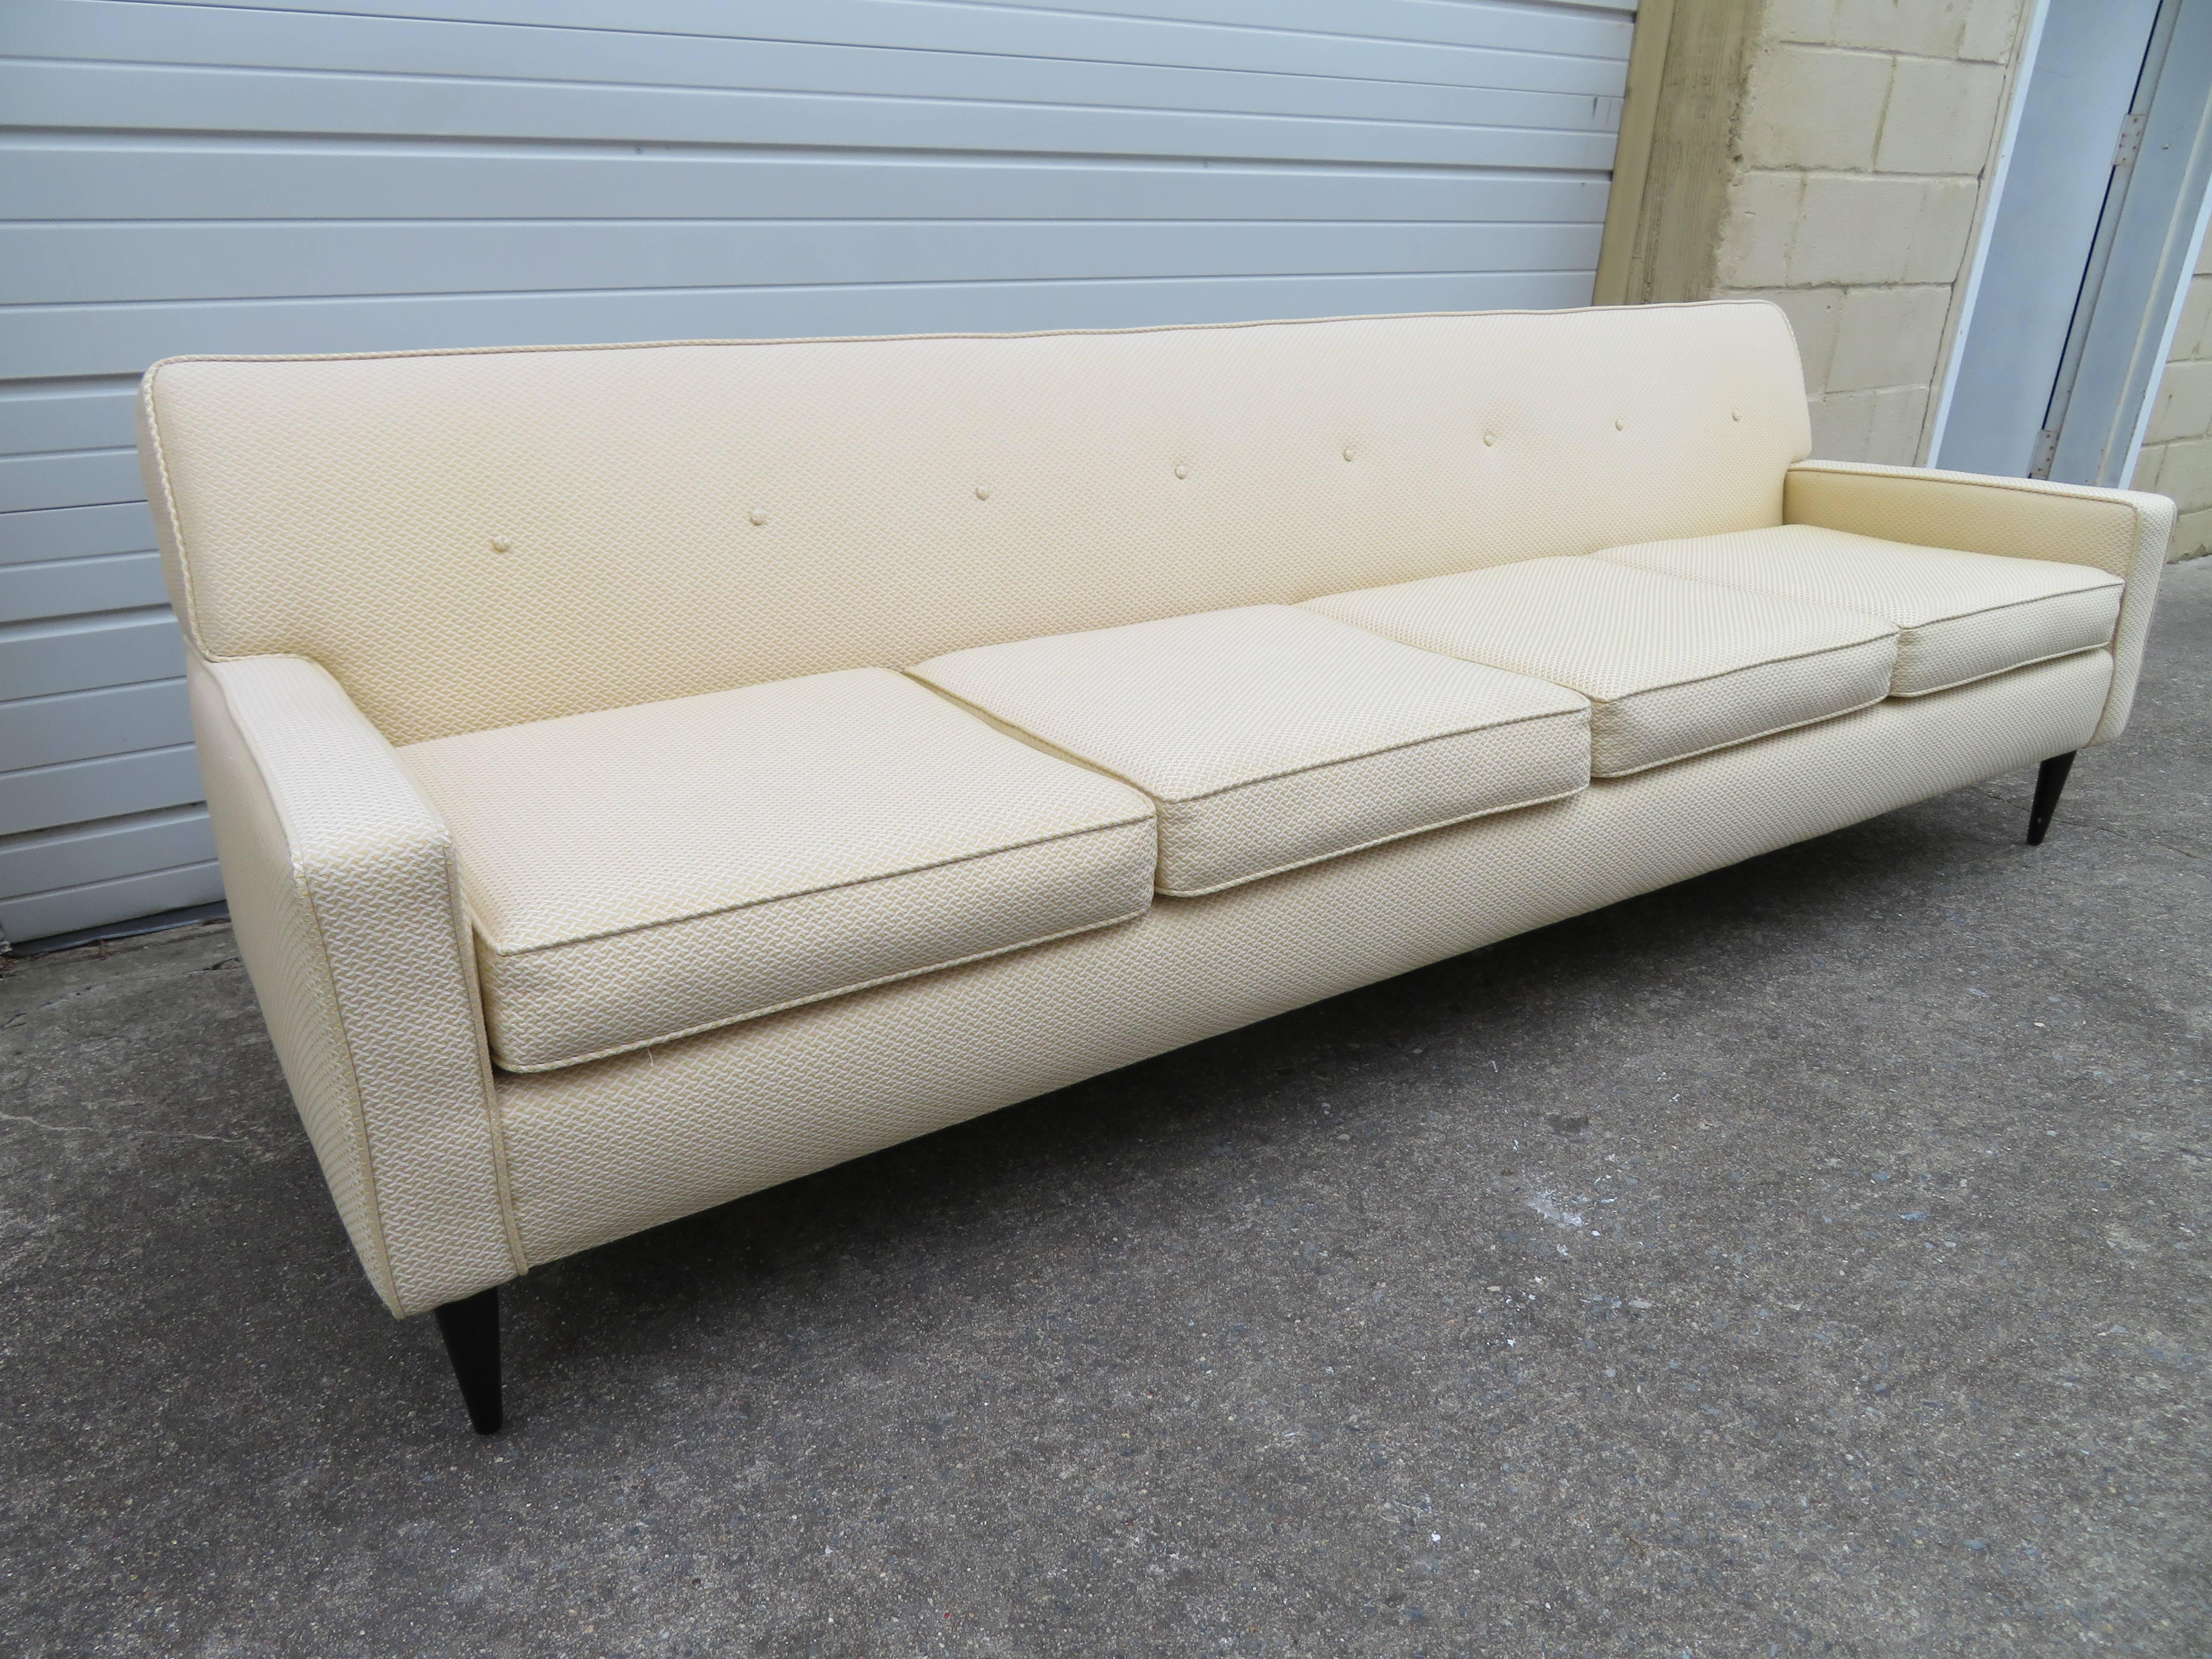 Handsome Harvey Probber style four-seat sofa with black lacquered tapered legs. Original white woven fabric still looks great with only light wear-very comfortable too. Please check out the matching fabric Probber style chairs listed in another of